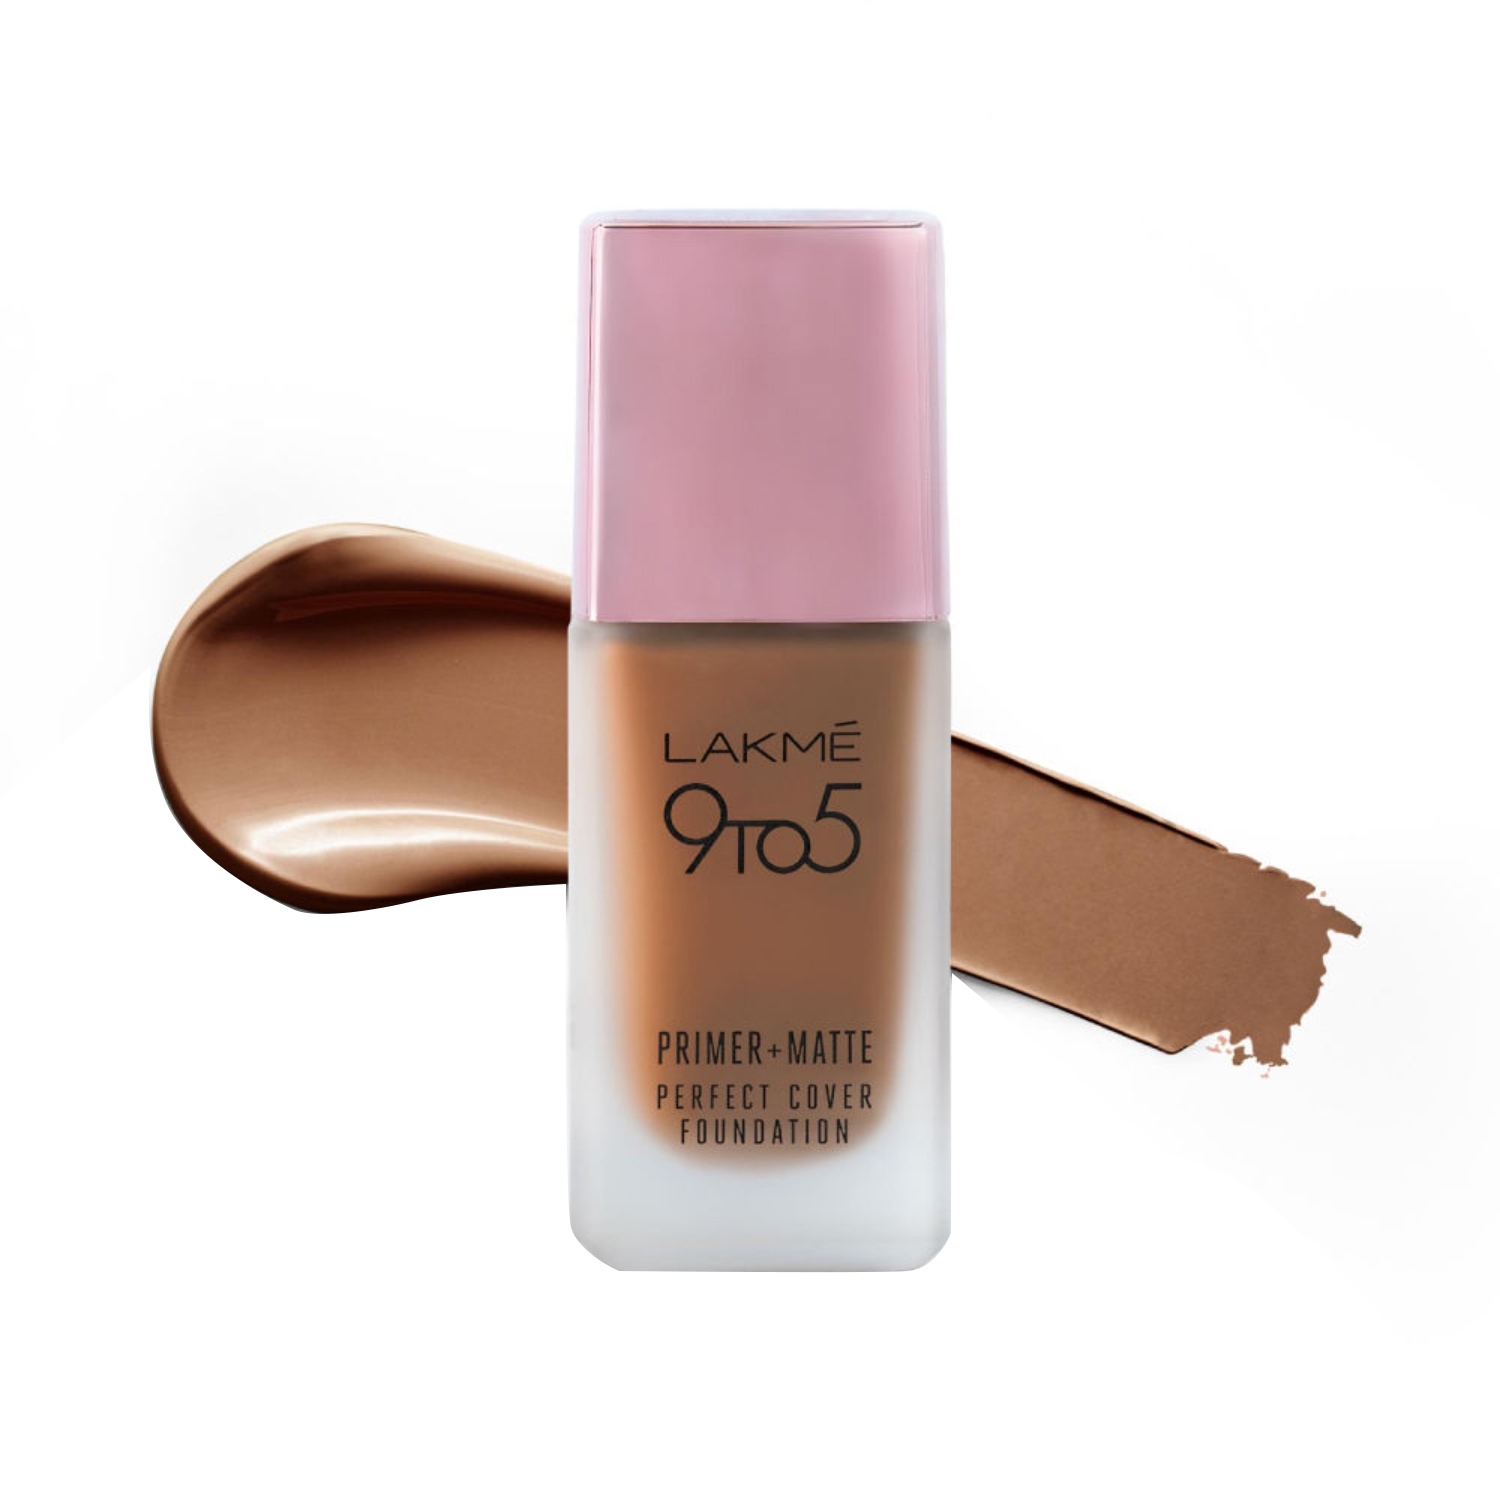 Lakme | Lakme 9 To 5 Primer + Matte Perfect Cover Foundation - C390 Cool Cocoa (25ml)